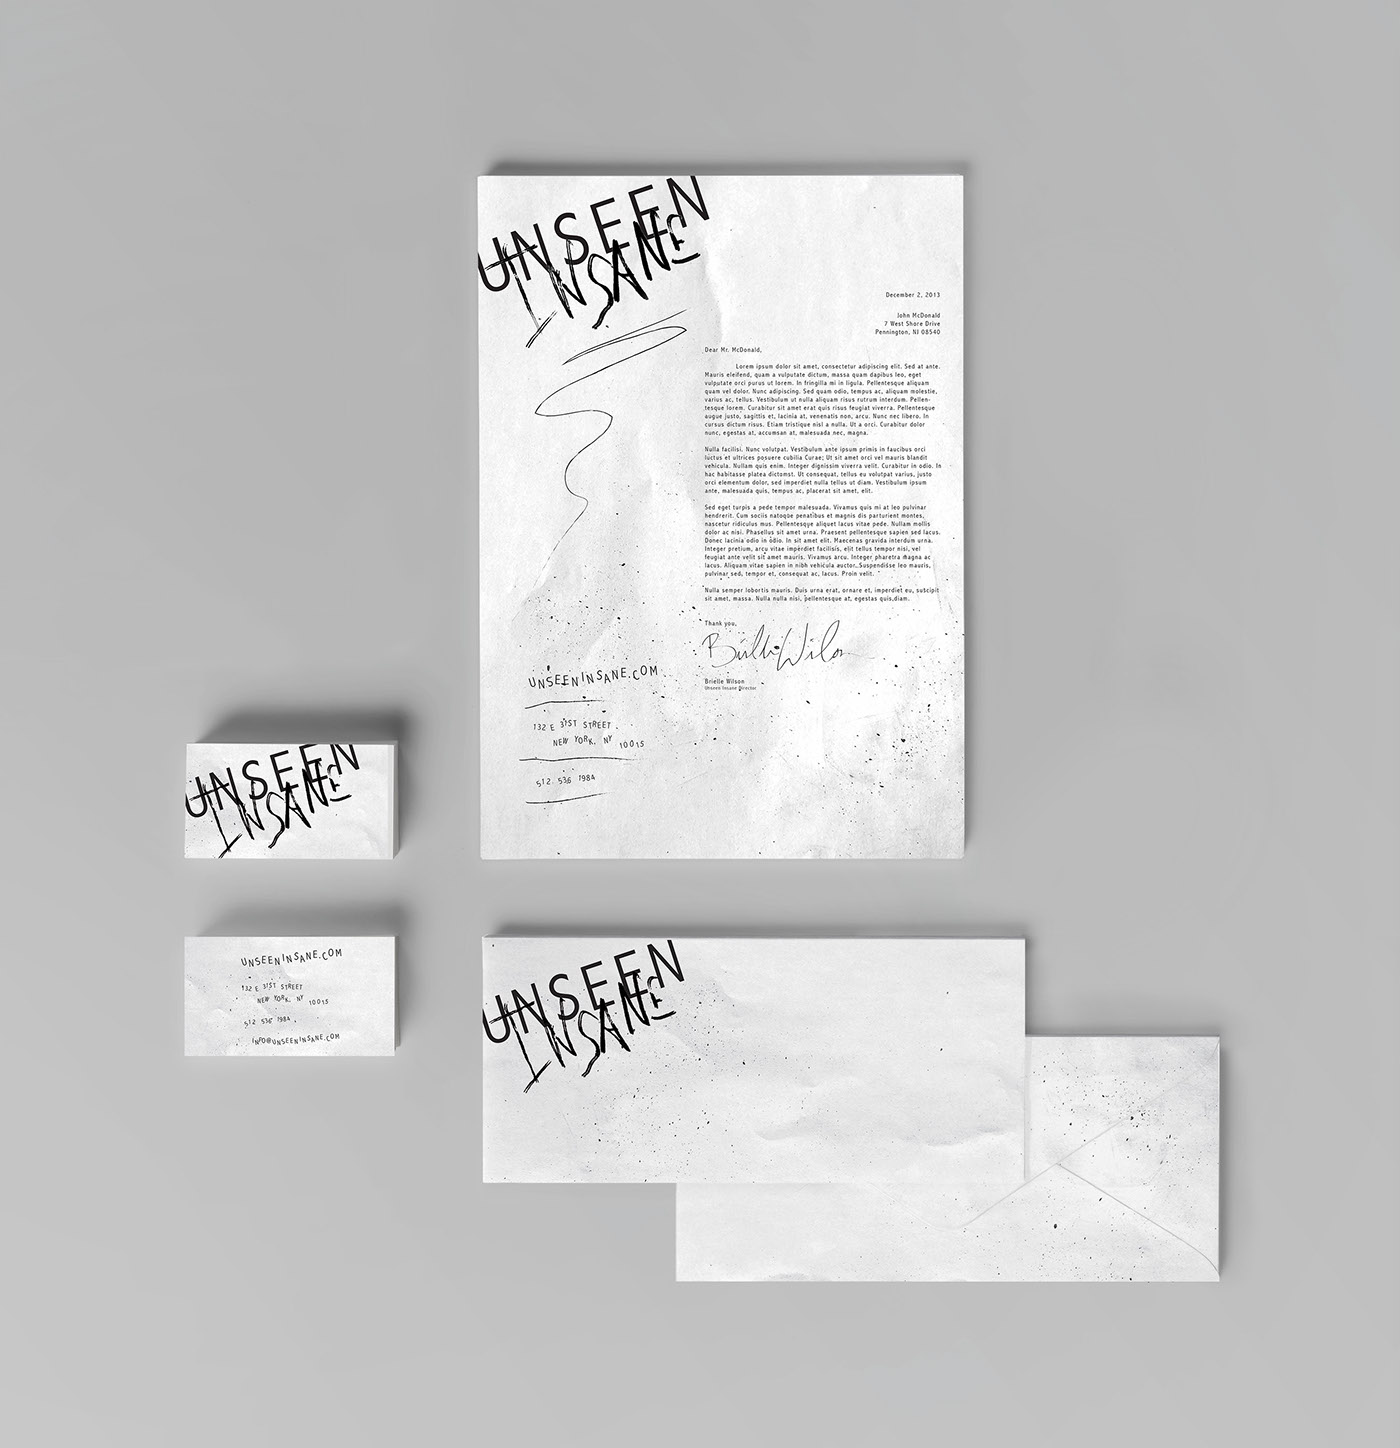 Visual Communication Mental Healthcare American Mental Health change Health past present future poster Website stationary business card advertisement